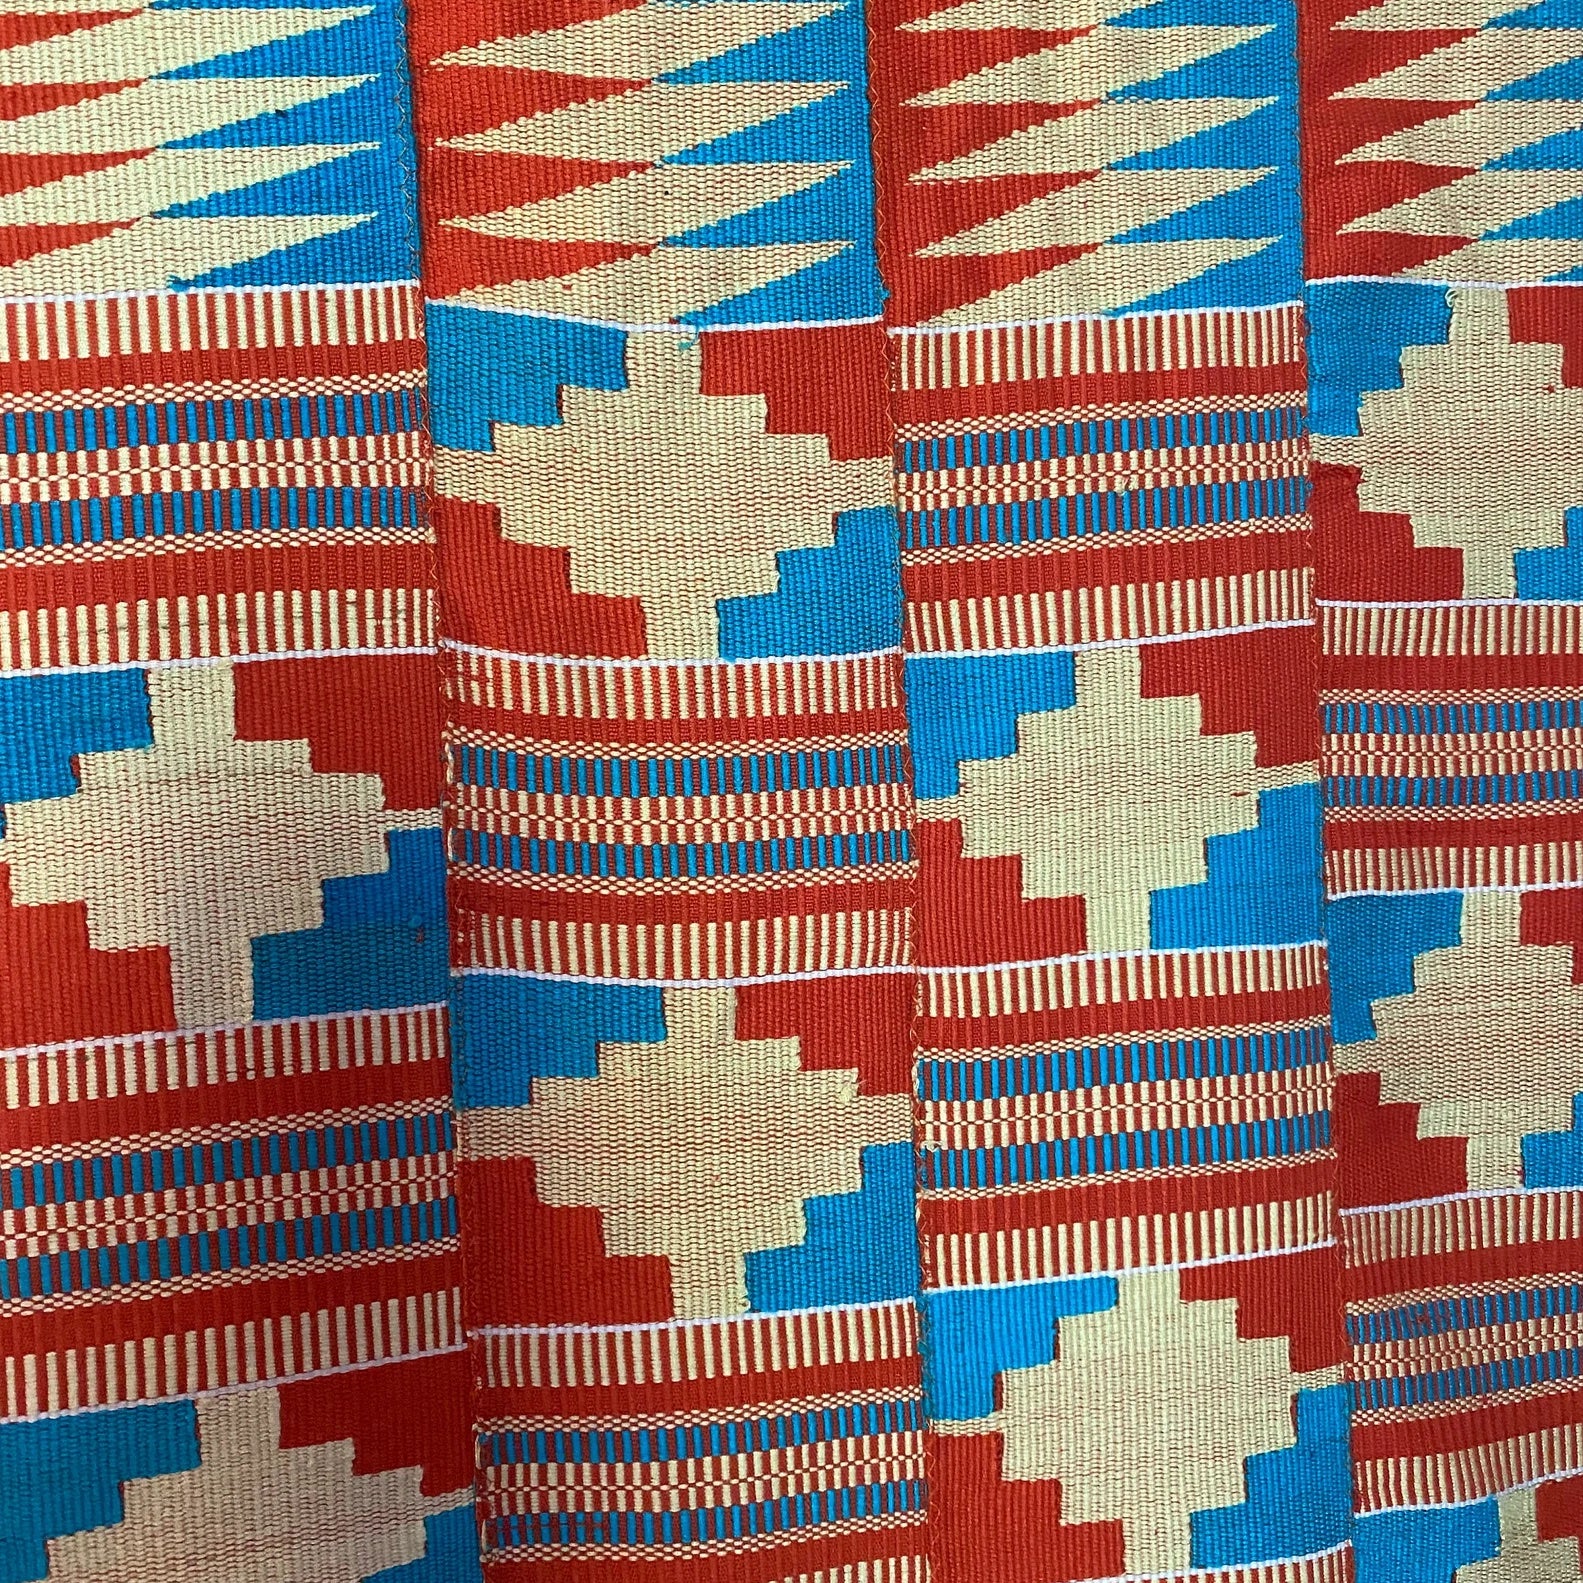 blue and red kente cloth